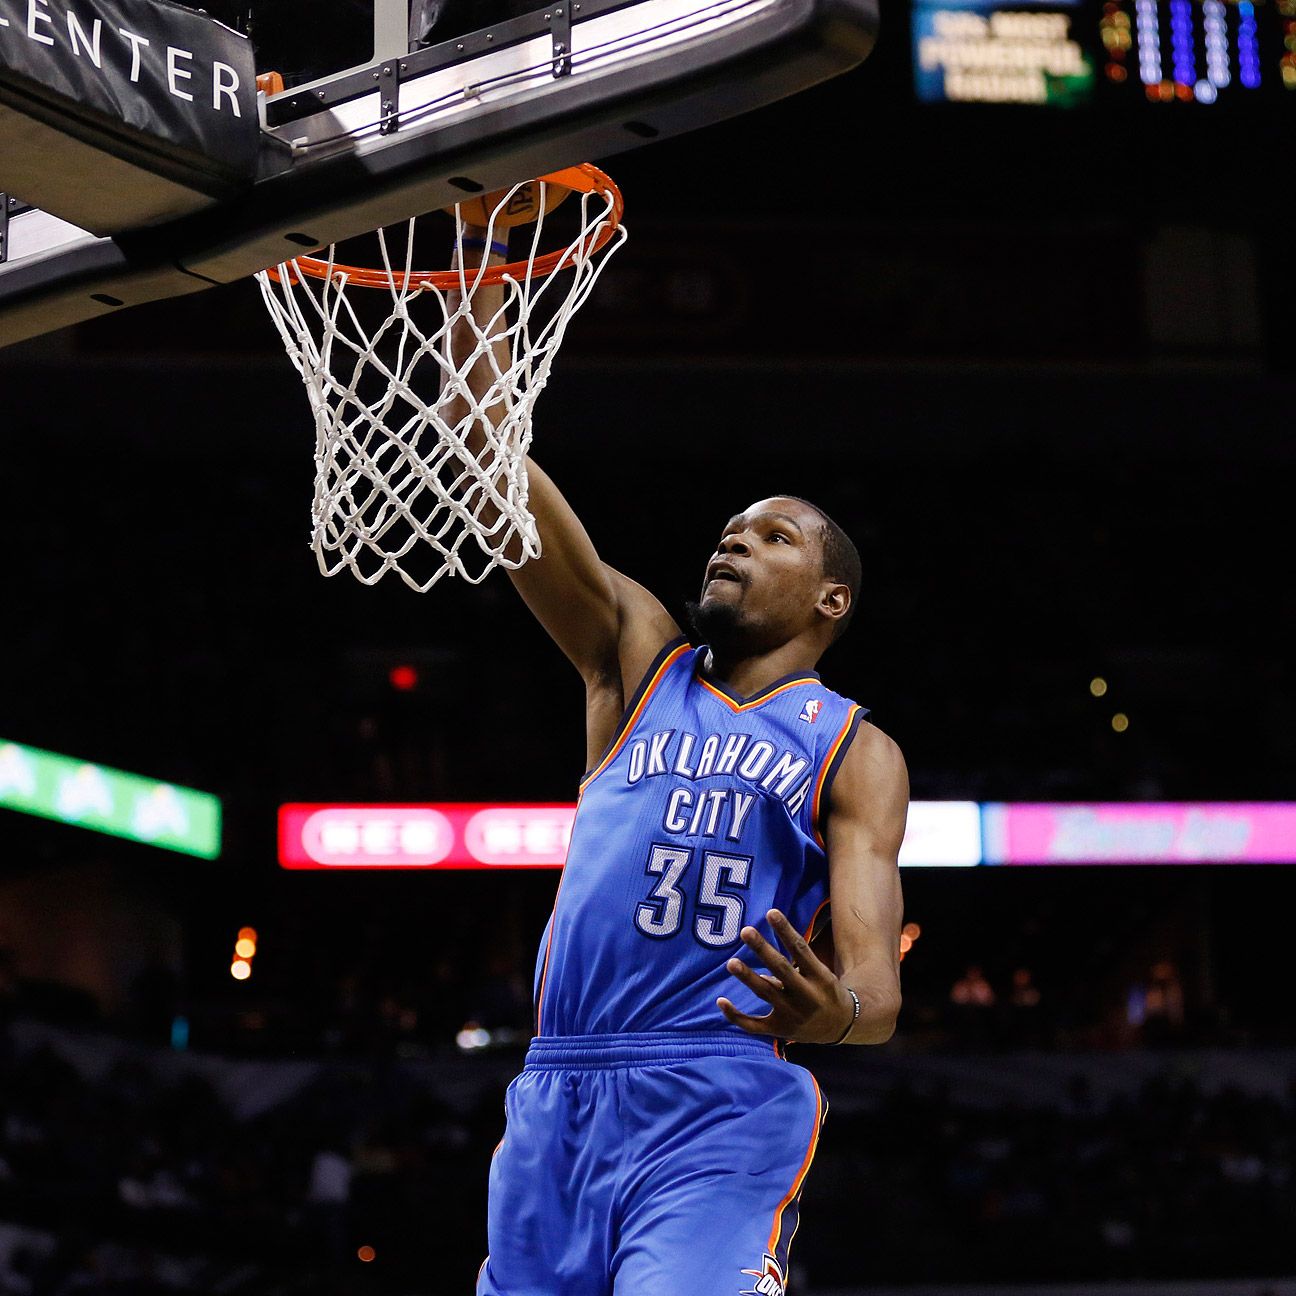 Kevin Durant of Oklahoma City Thunder unimpressed with recent hot streak